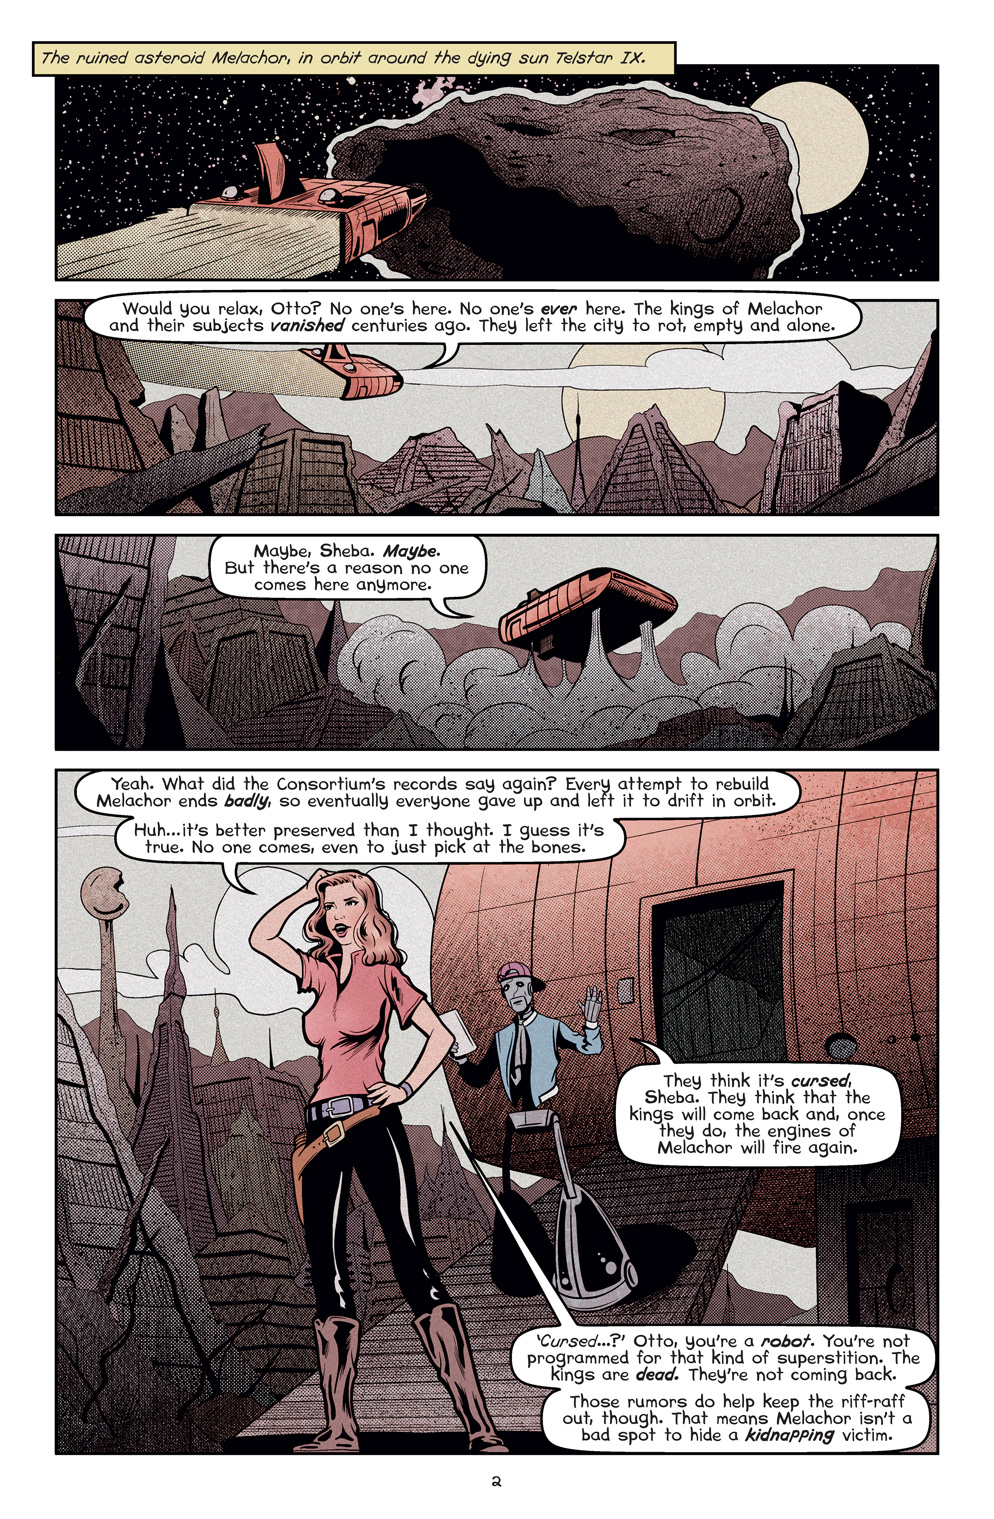 Page 2 of the short comic book story 'Sheba the Great' written and illustrated by Von Allan